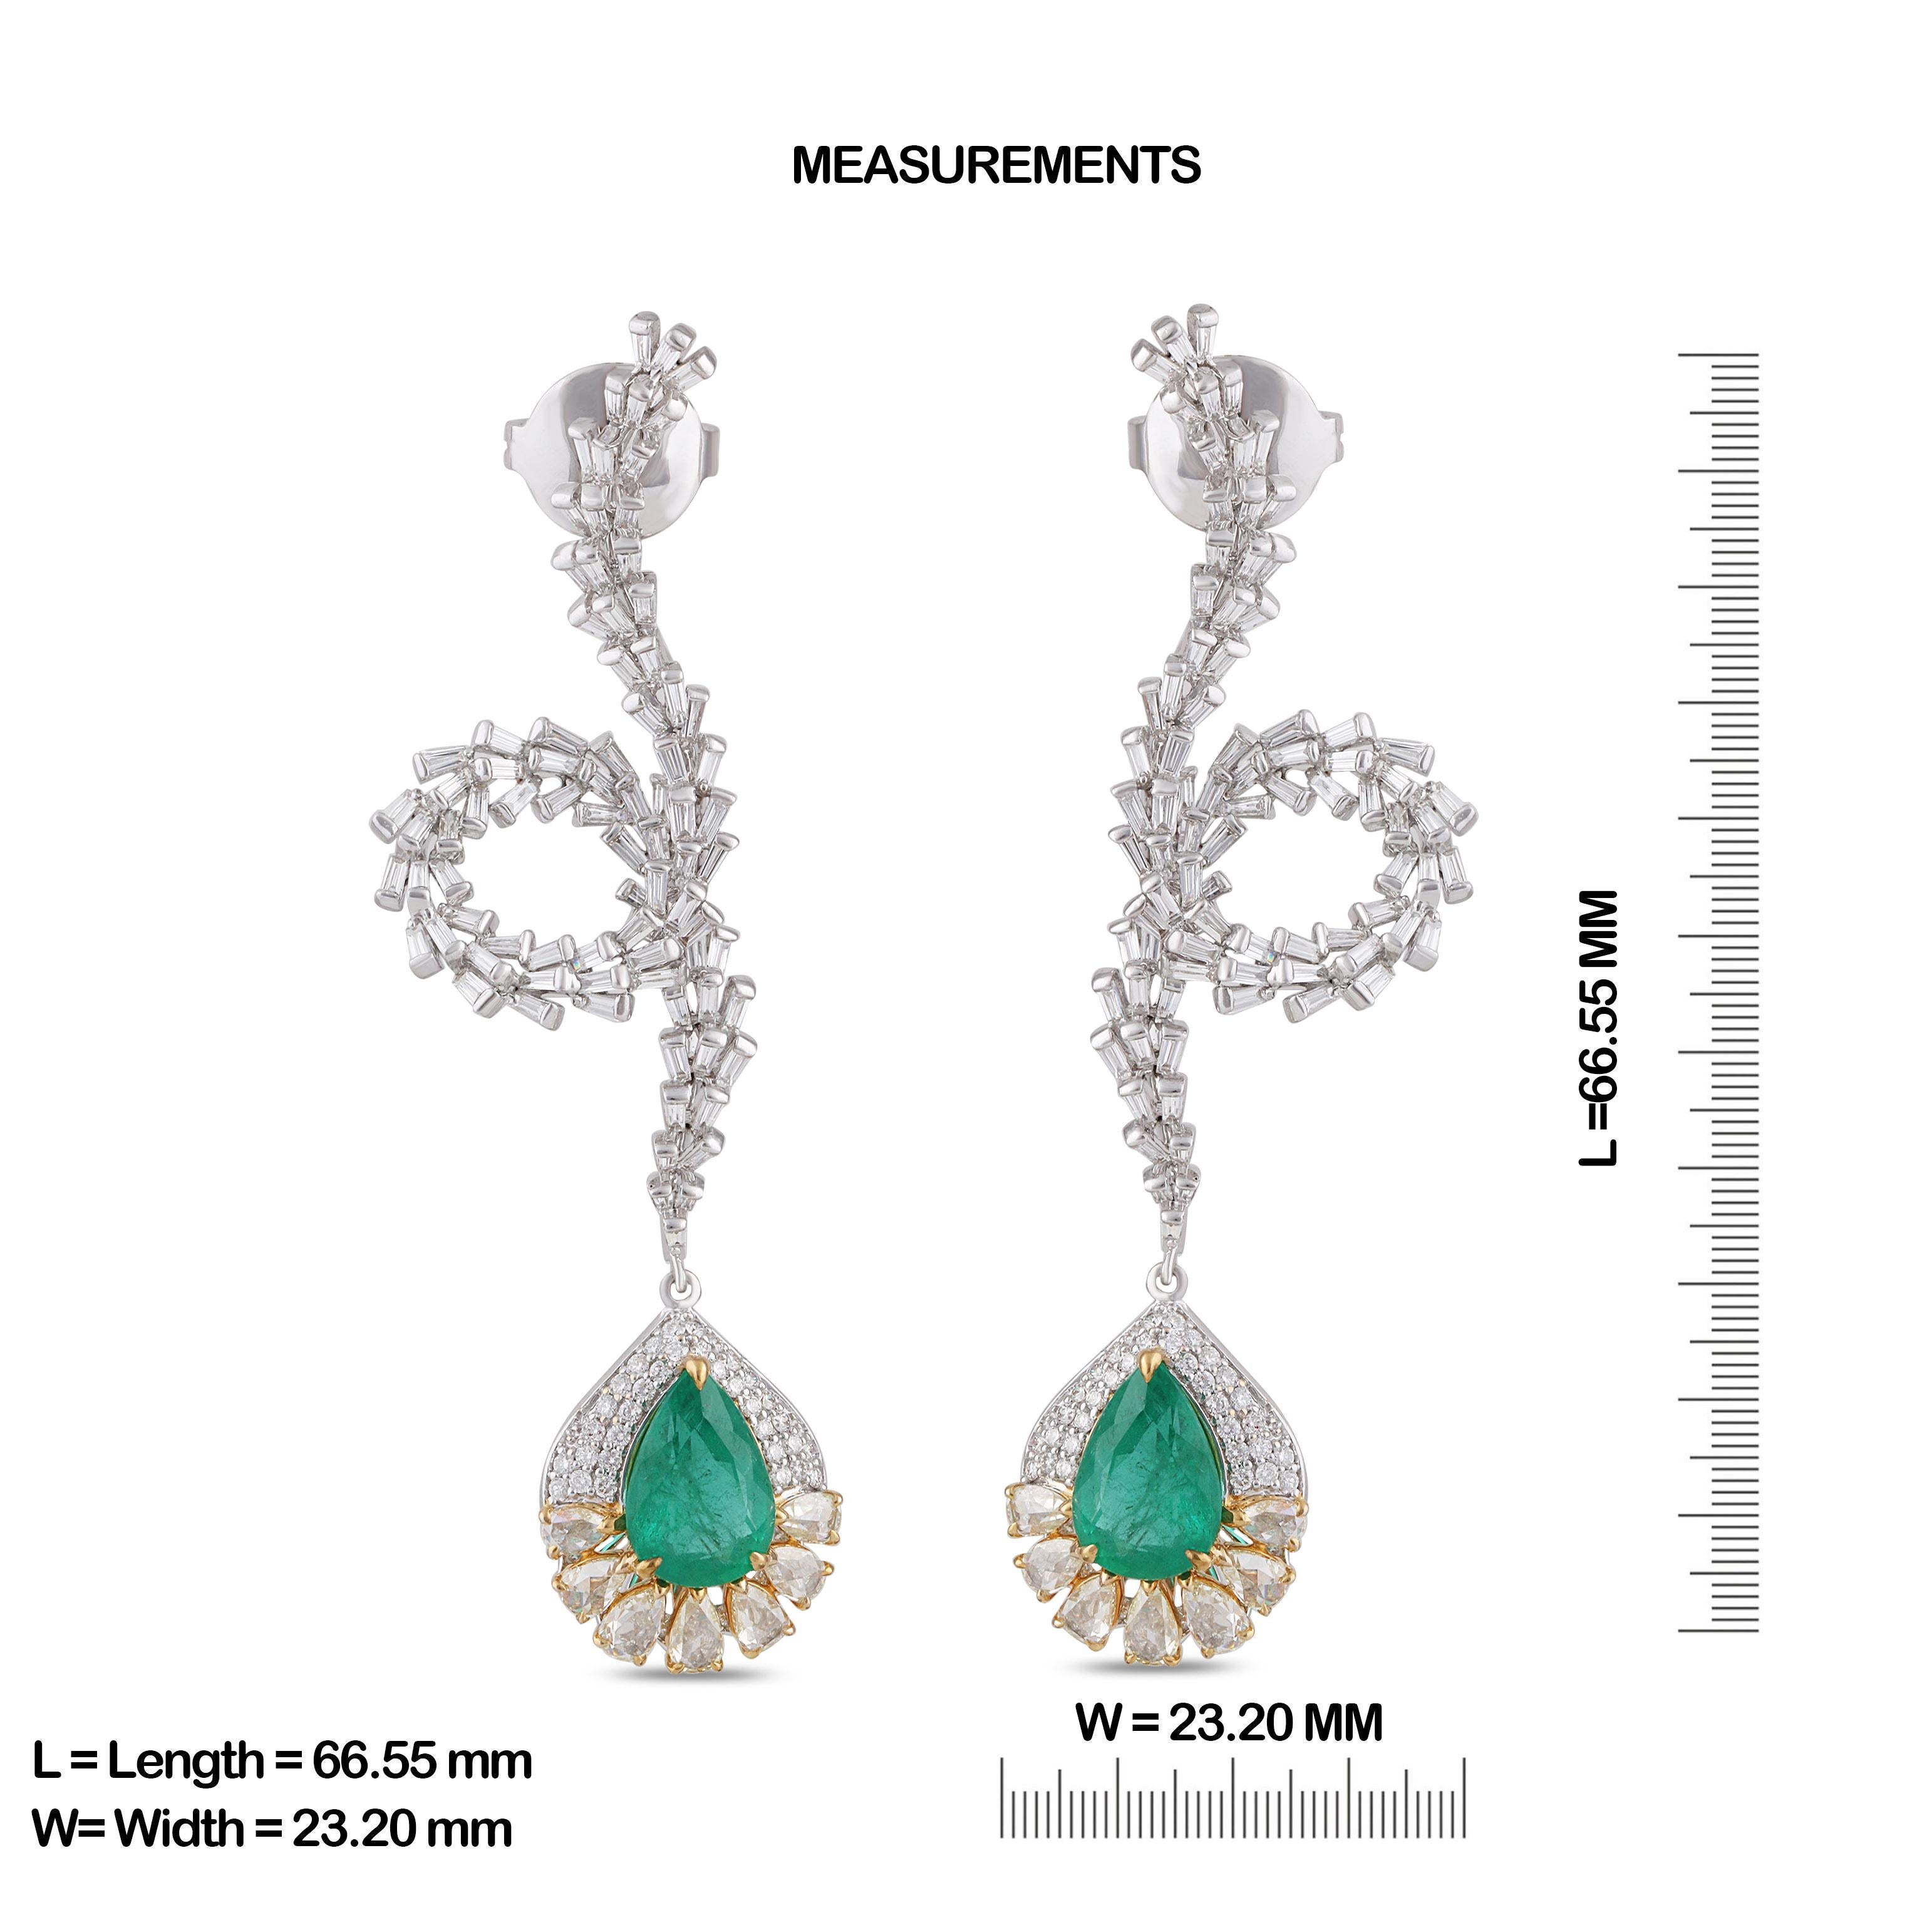 Tapered Baguette Studio Rêves Diamond and Emerald Fancy Curled Dangling Earrings in 18 Karat Gold For Sale